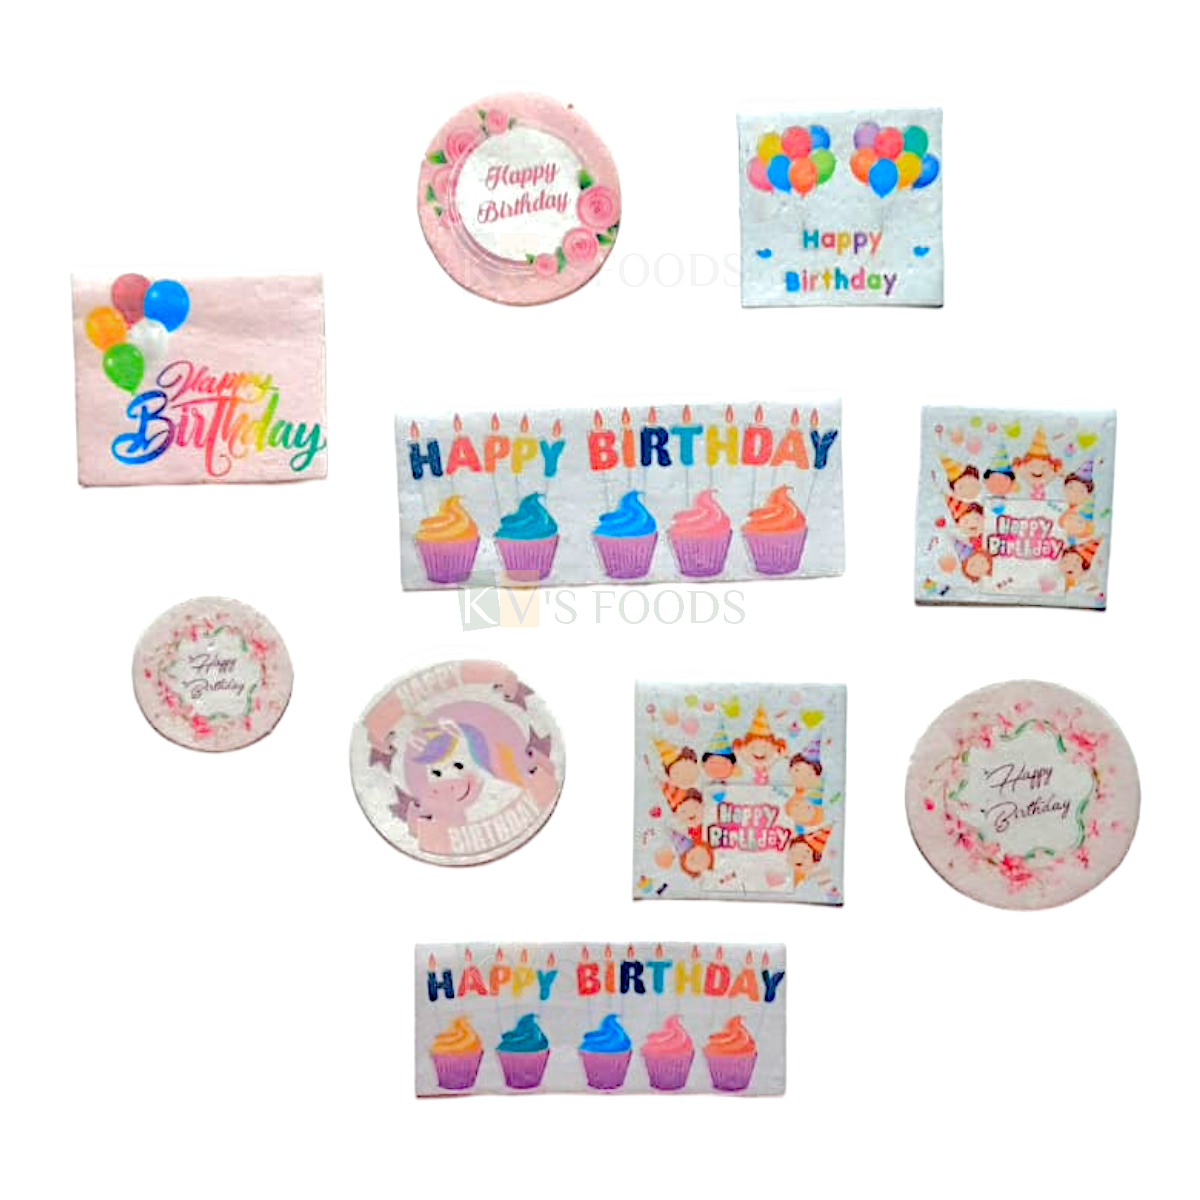 10 PCs Happy Birthday Mix Design Pre-Cut Pre-Printed Edible Wafer Paper Cutouts Stick-on Cake Decor Kids Girls Happy Birthday Banners Balloons, Cupcakes Candle Designs DIY Cake Decorations